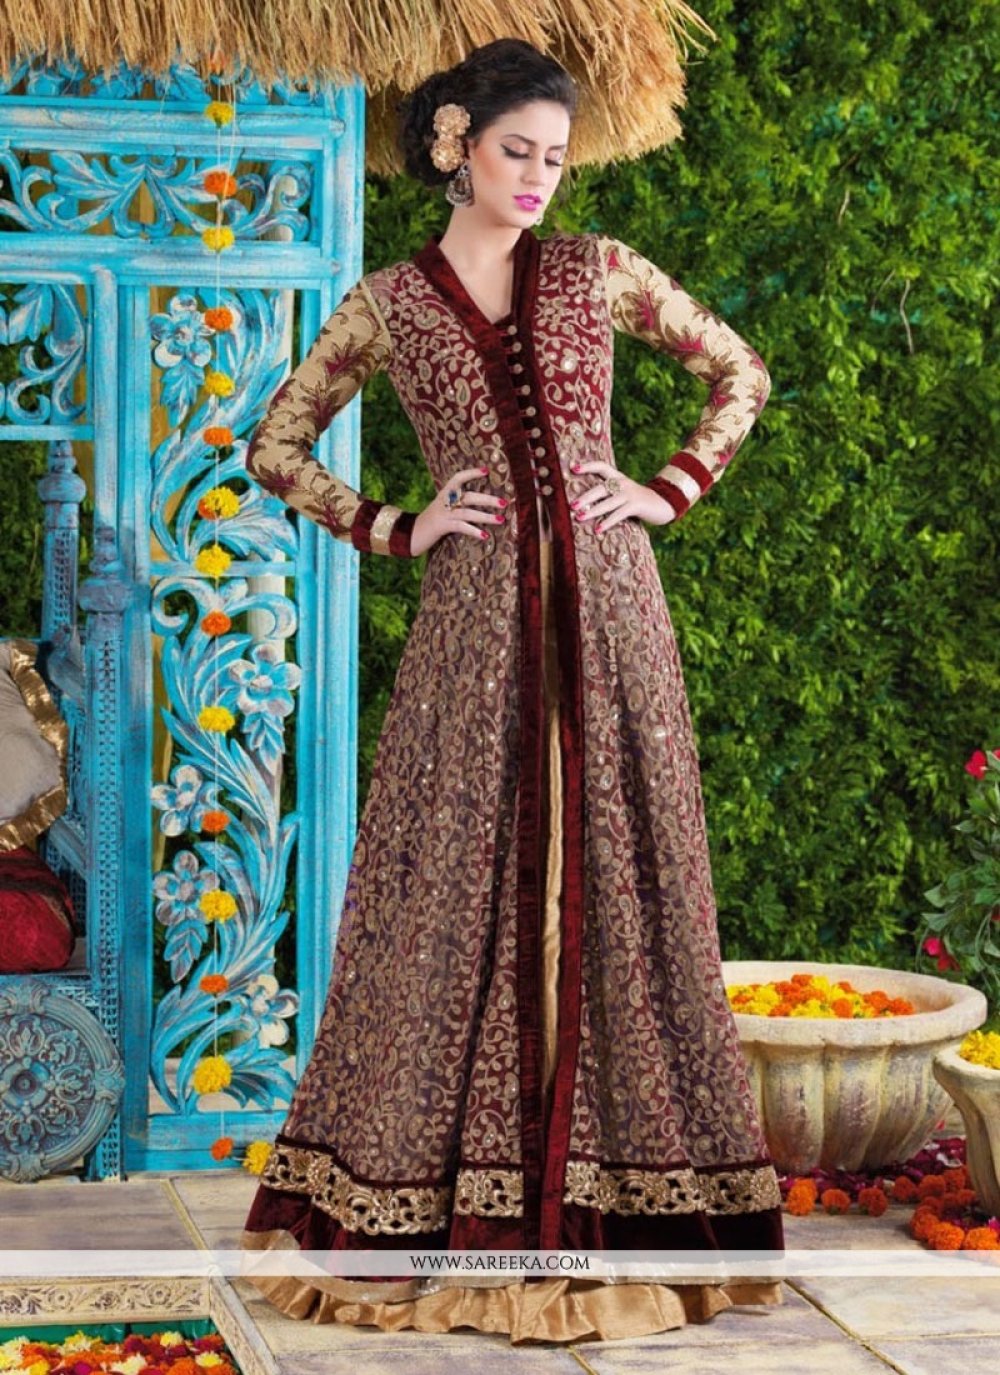 What is the difference between an Anarkali suit and a Lehenga? - Quora